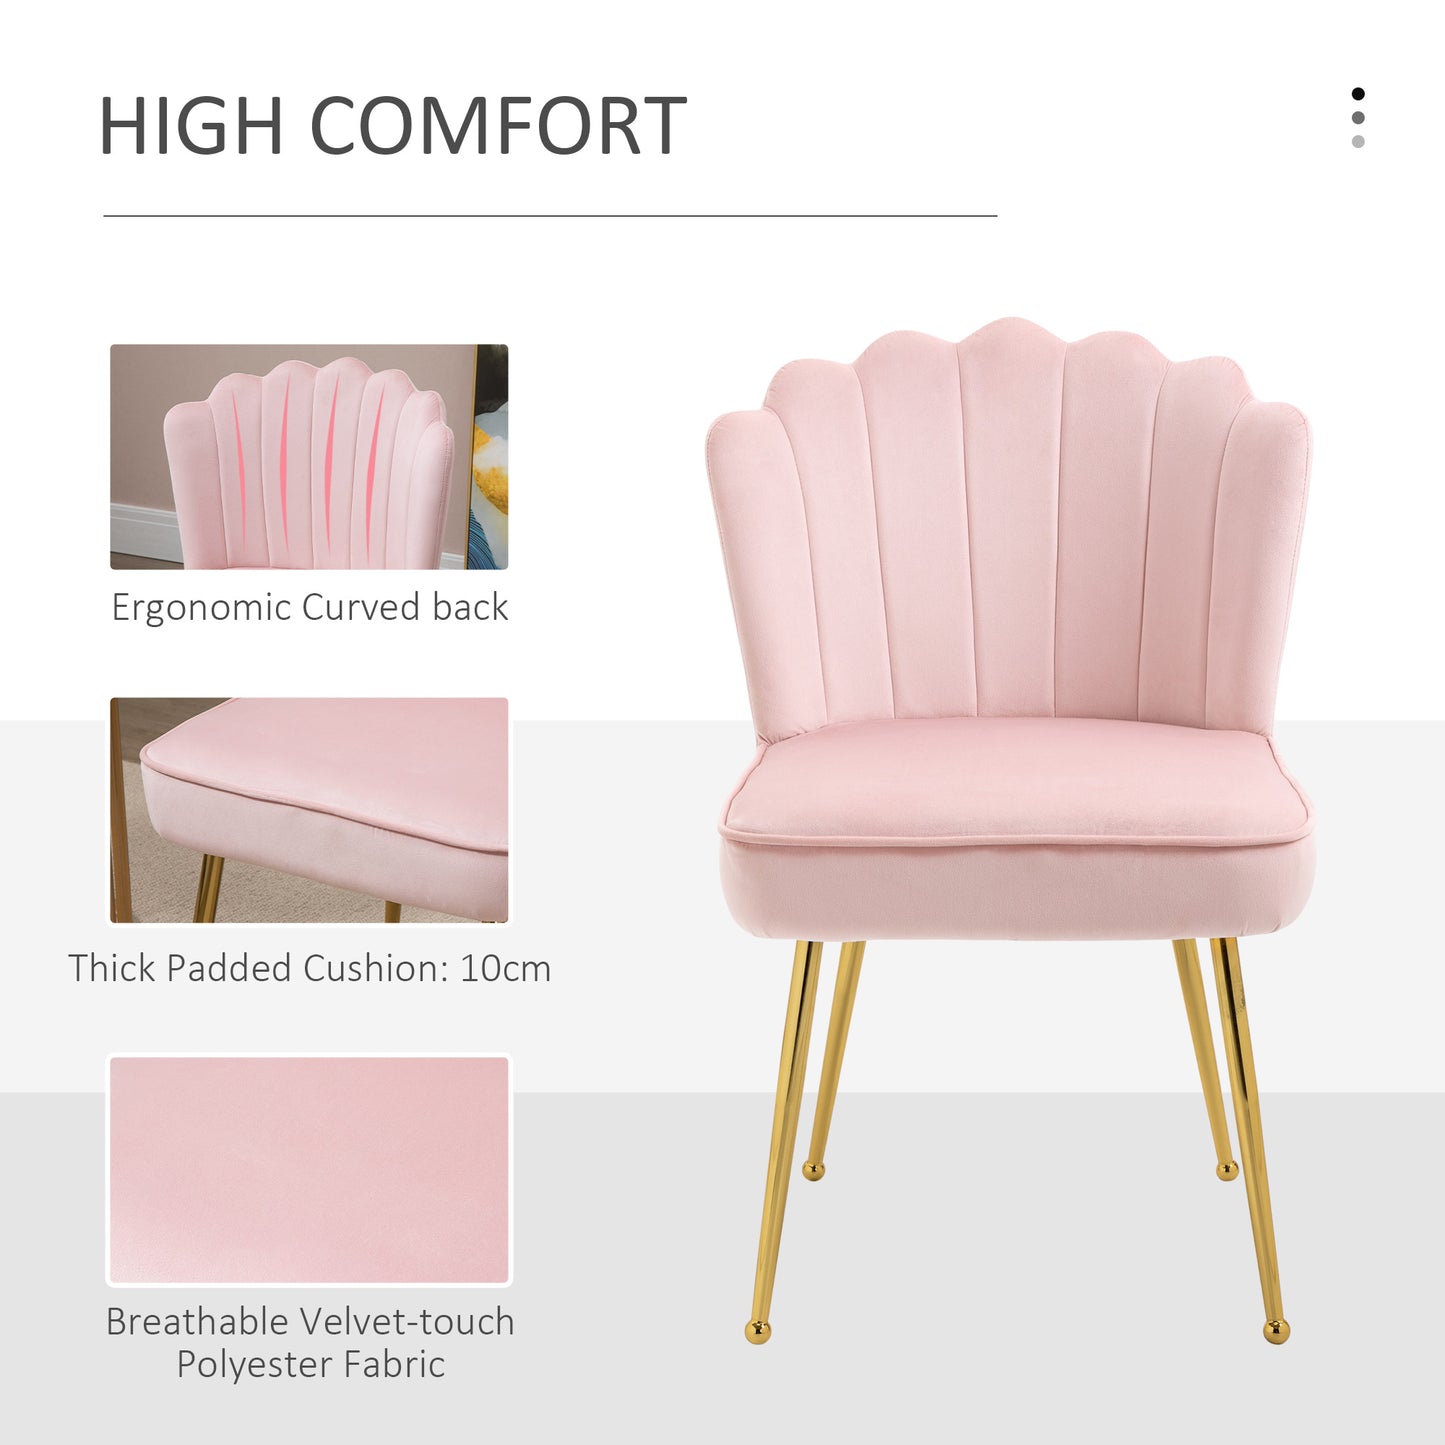 HOMCOM Velvet-Feel Shell Luxe Accent Chair, Glam Vanity Chair Makeup Seat, Home Bedroom Lounge with Metal Legs Comfort Padding, Pink